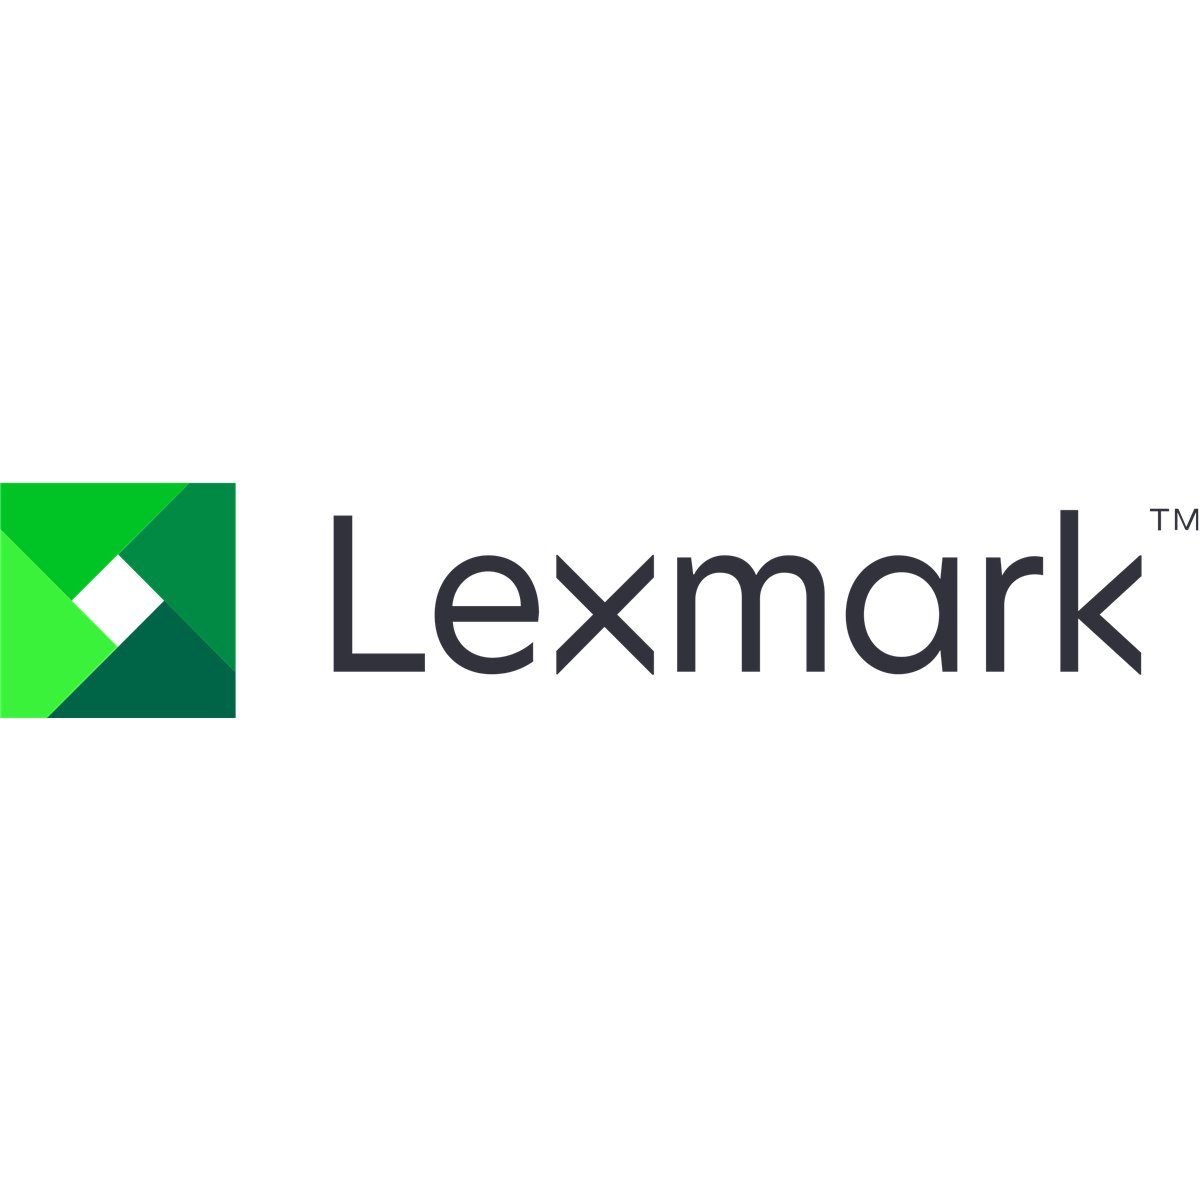 Lexmark MX91x SVC Other General adf Scan Pad Spare Part